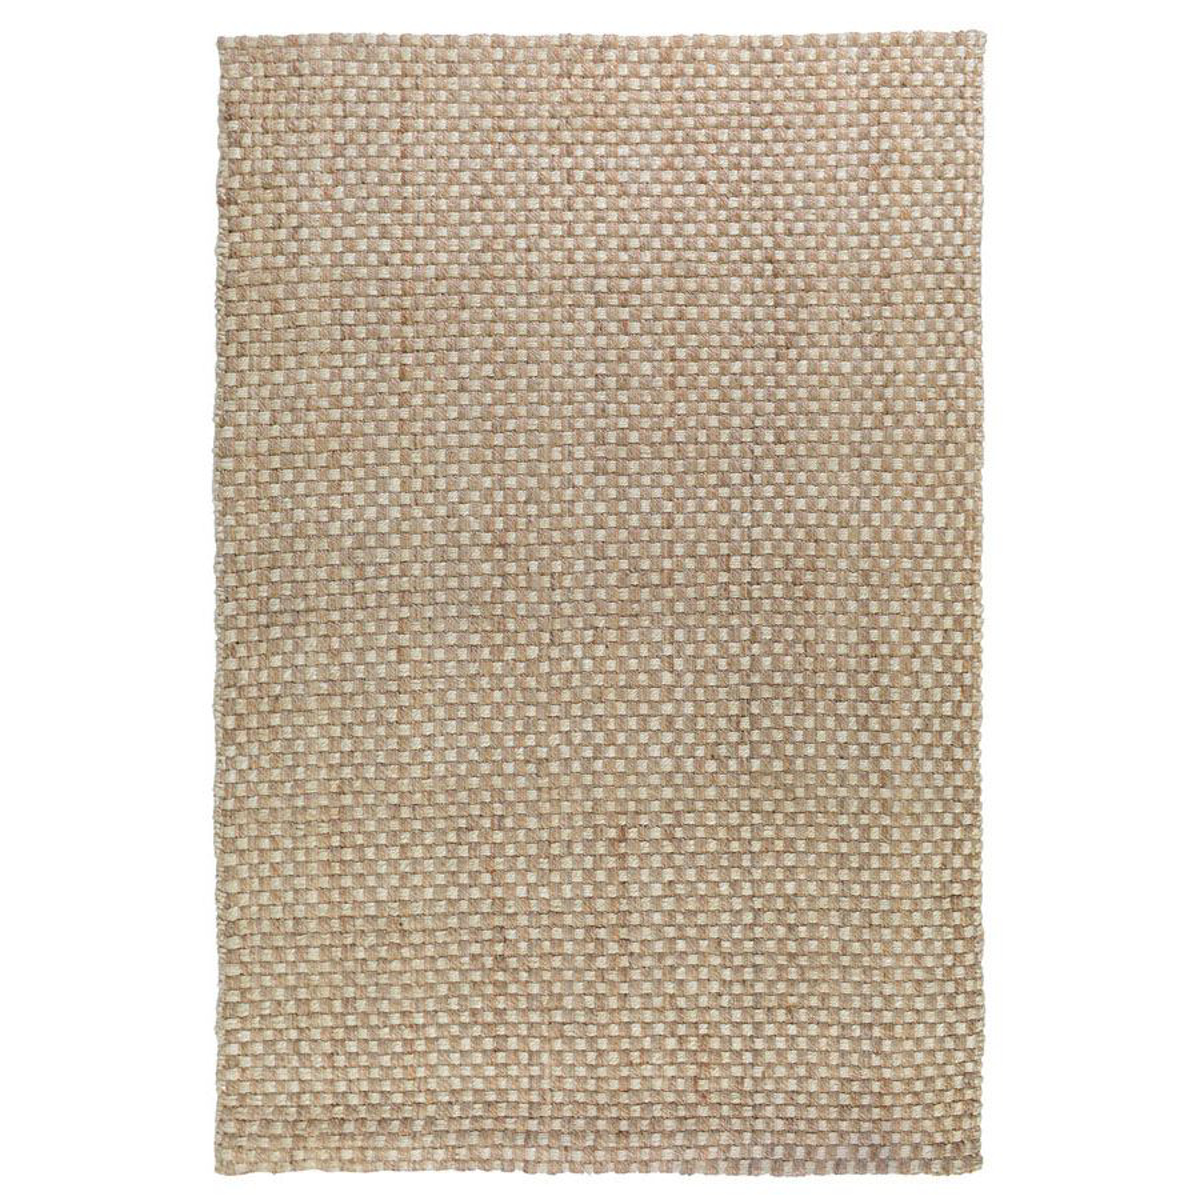 Picture of Basket Weave Natural and Bleach 8X10 Rug